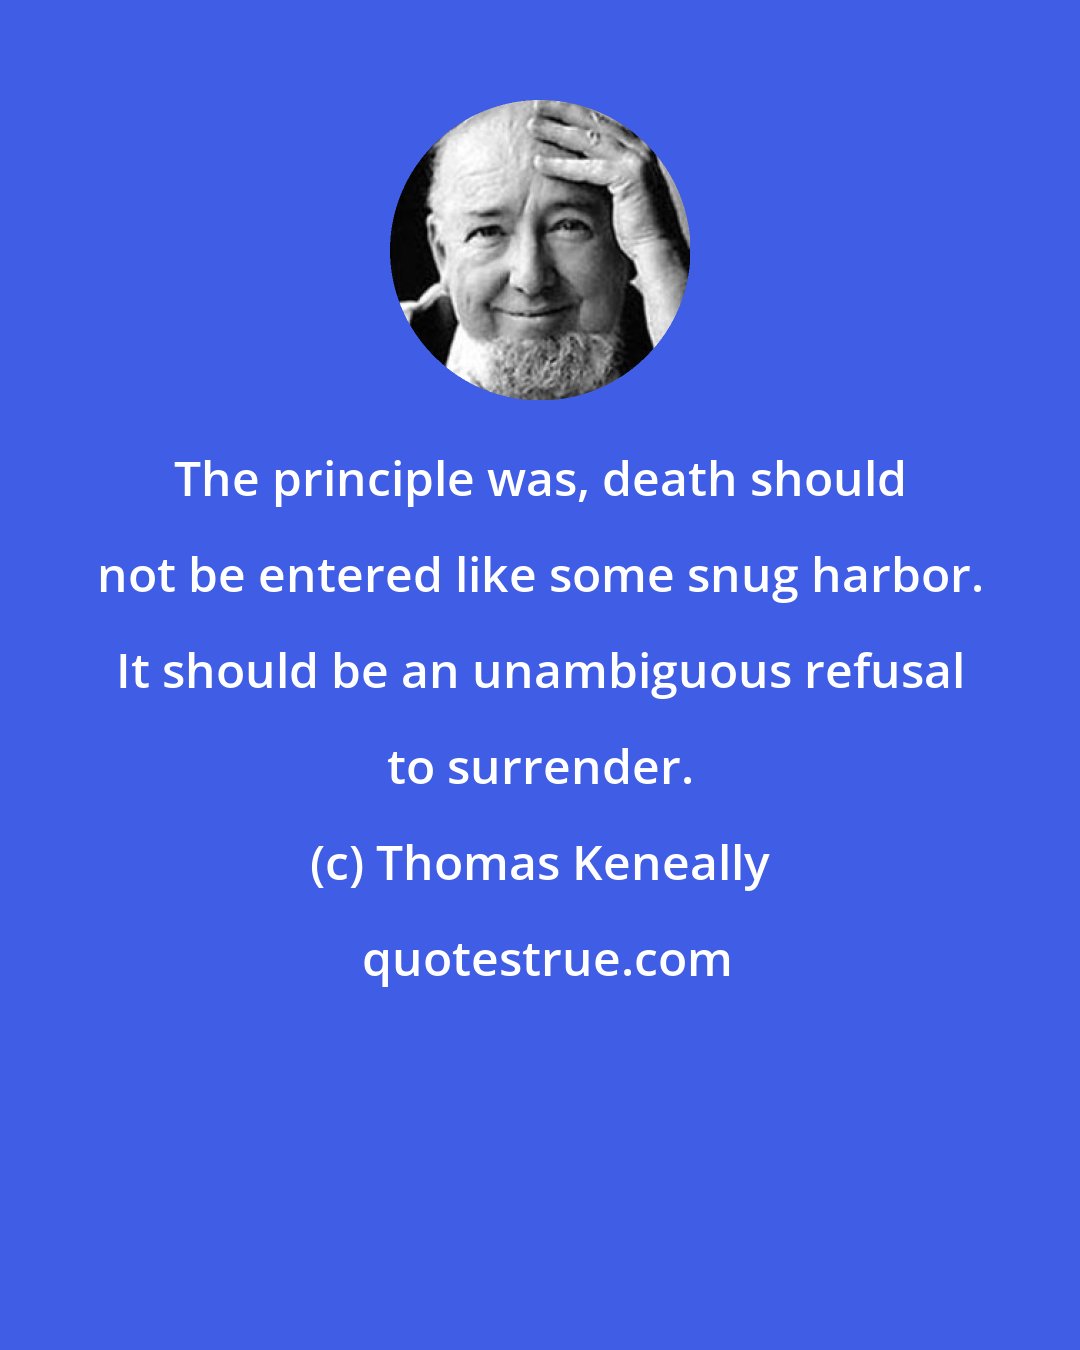 Thomas Keneally: The principle was, death should not be entered like some snug harbor. It should be an unambiguous refusal to surrender.